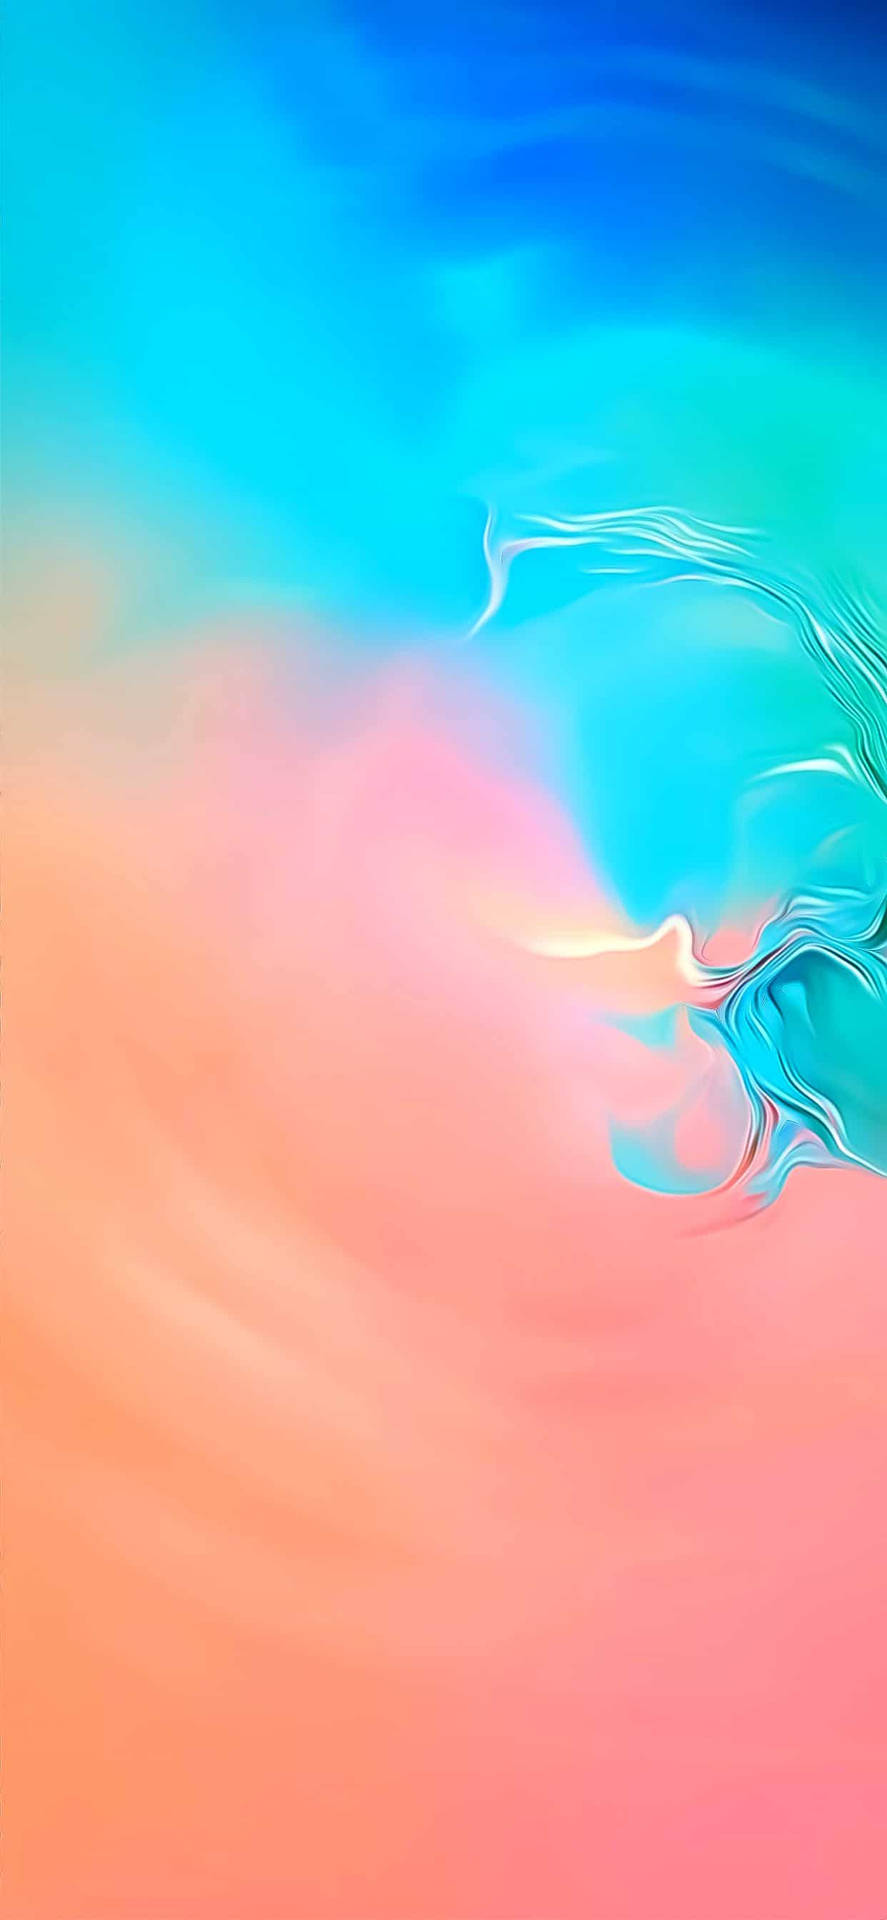 Enjoy Colorful Bliss with Samsung Galaxy S10 Wallpaper